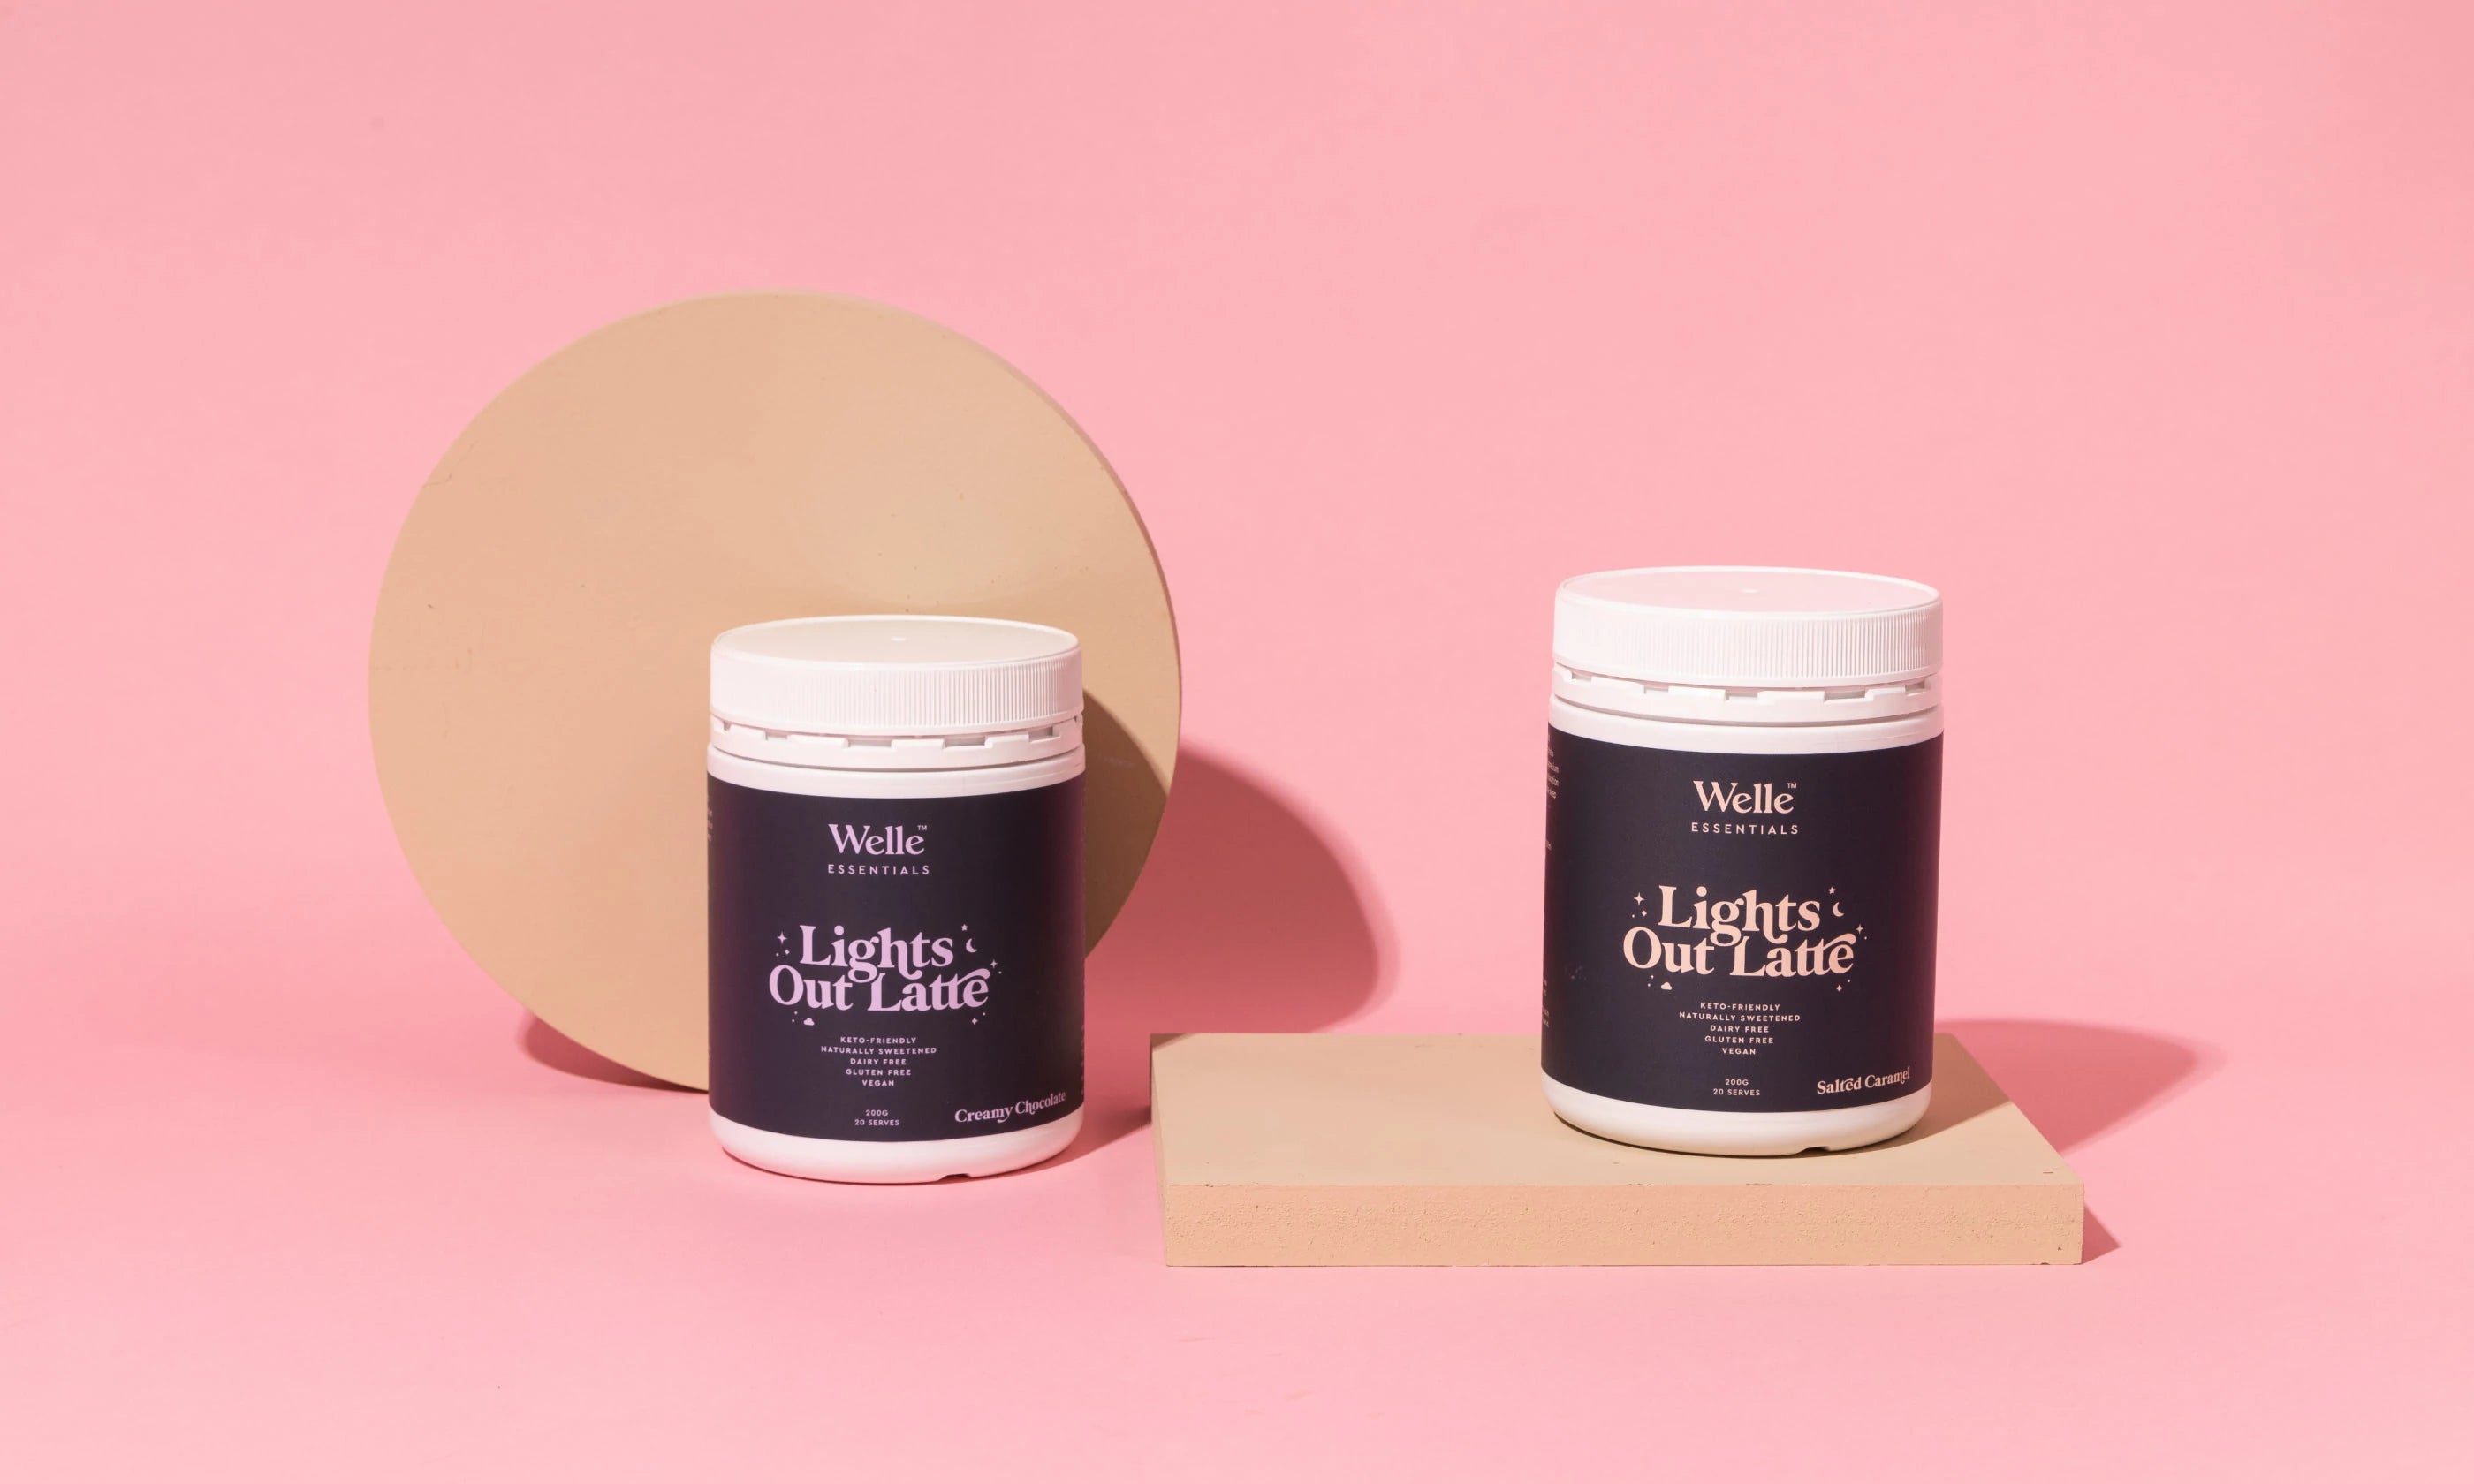 Lights Out Latte product range on pink background